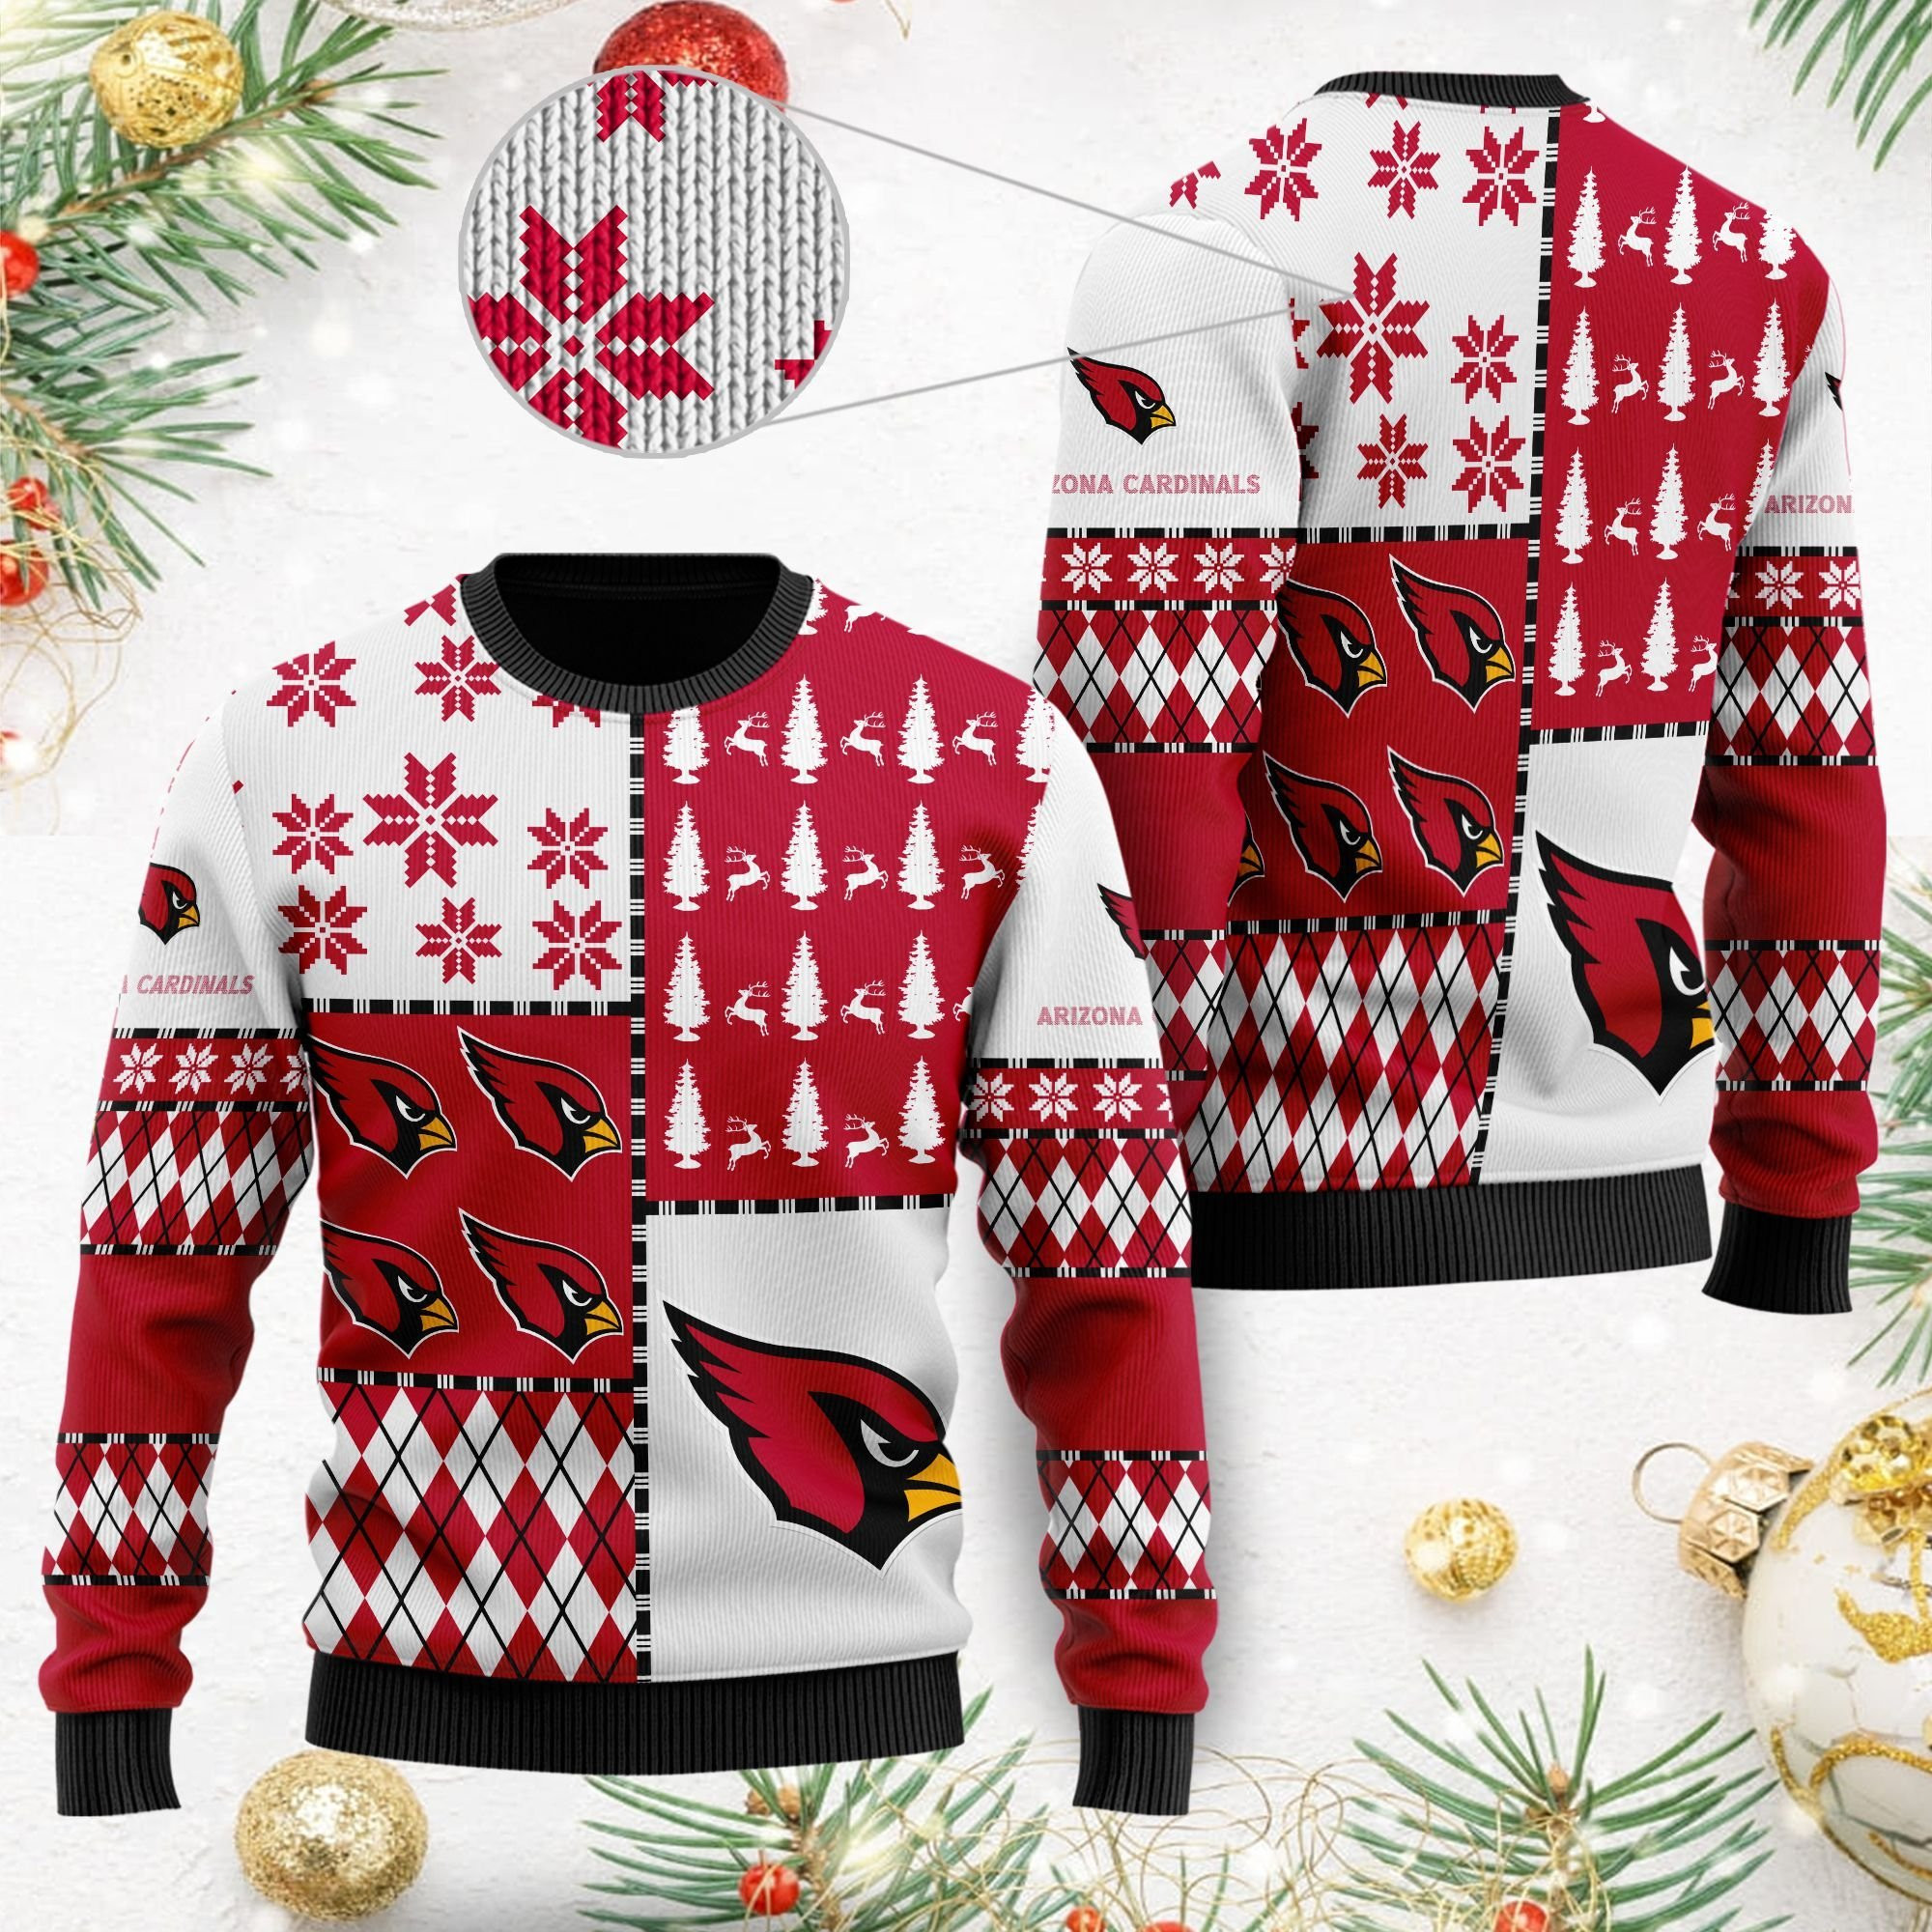 Buy Arizona Cardinals Ugly Christmas Sweaters Best Christmas Gift For